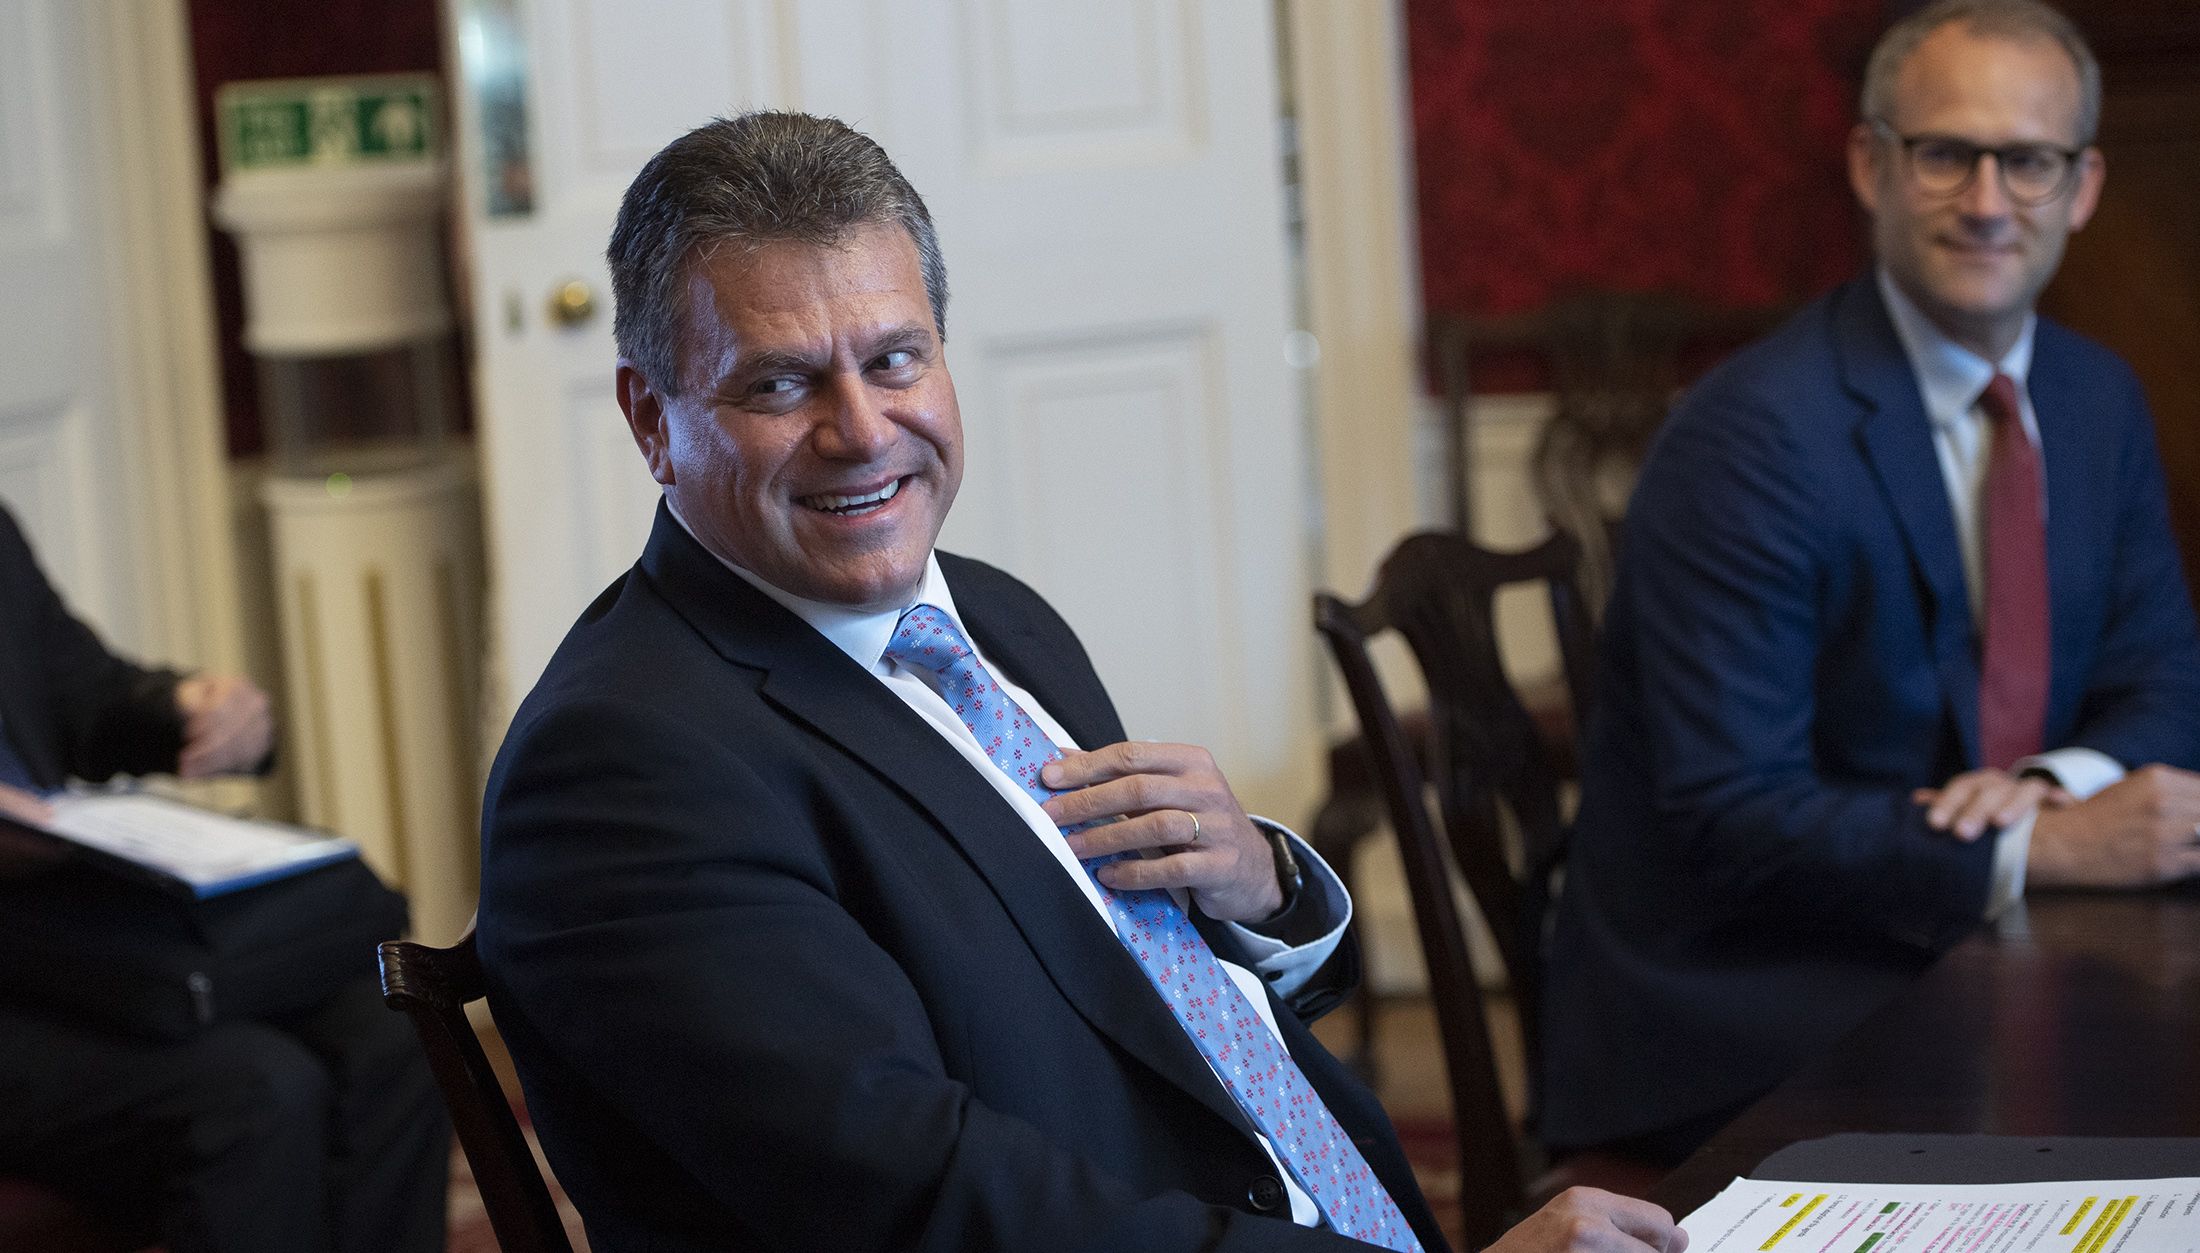 European Commission vice president Maros Sefcovic before the start of the first EU-UK partnership council at Admiralty House in London chaired by Brexit minister Lord Frost in June 2021.